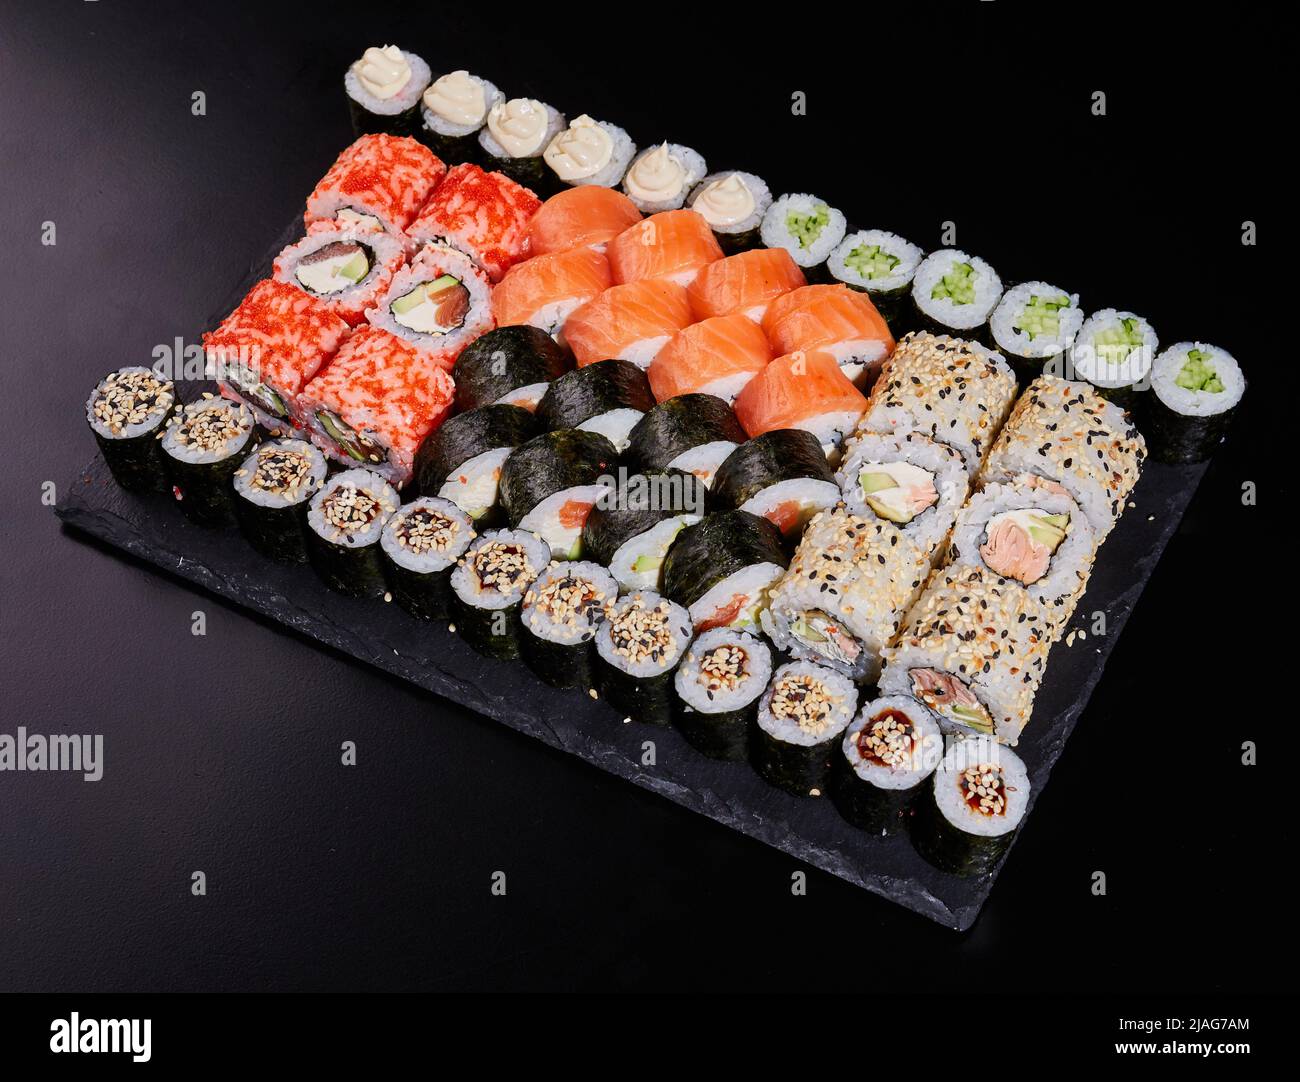 https://c8.alamy.com/comp/2JAG7AM/large-set-of-various-sushi-rolls-with-fresh-different-fillings-on-a-black-stone-plate-2JAG7AM.jpg